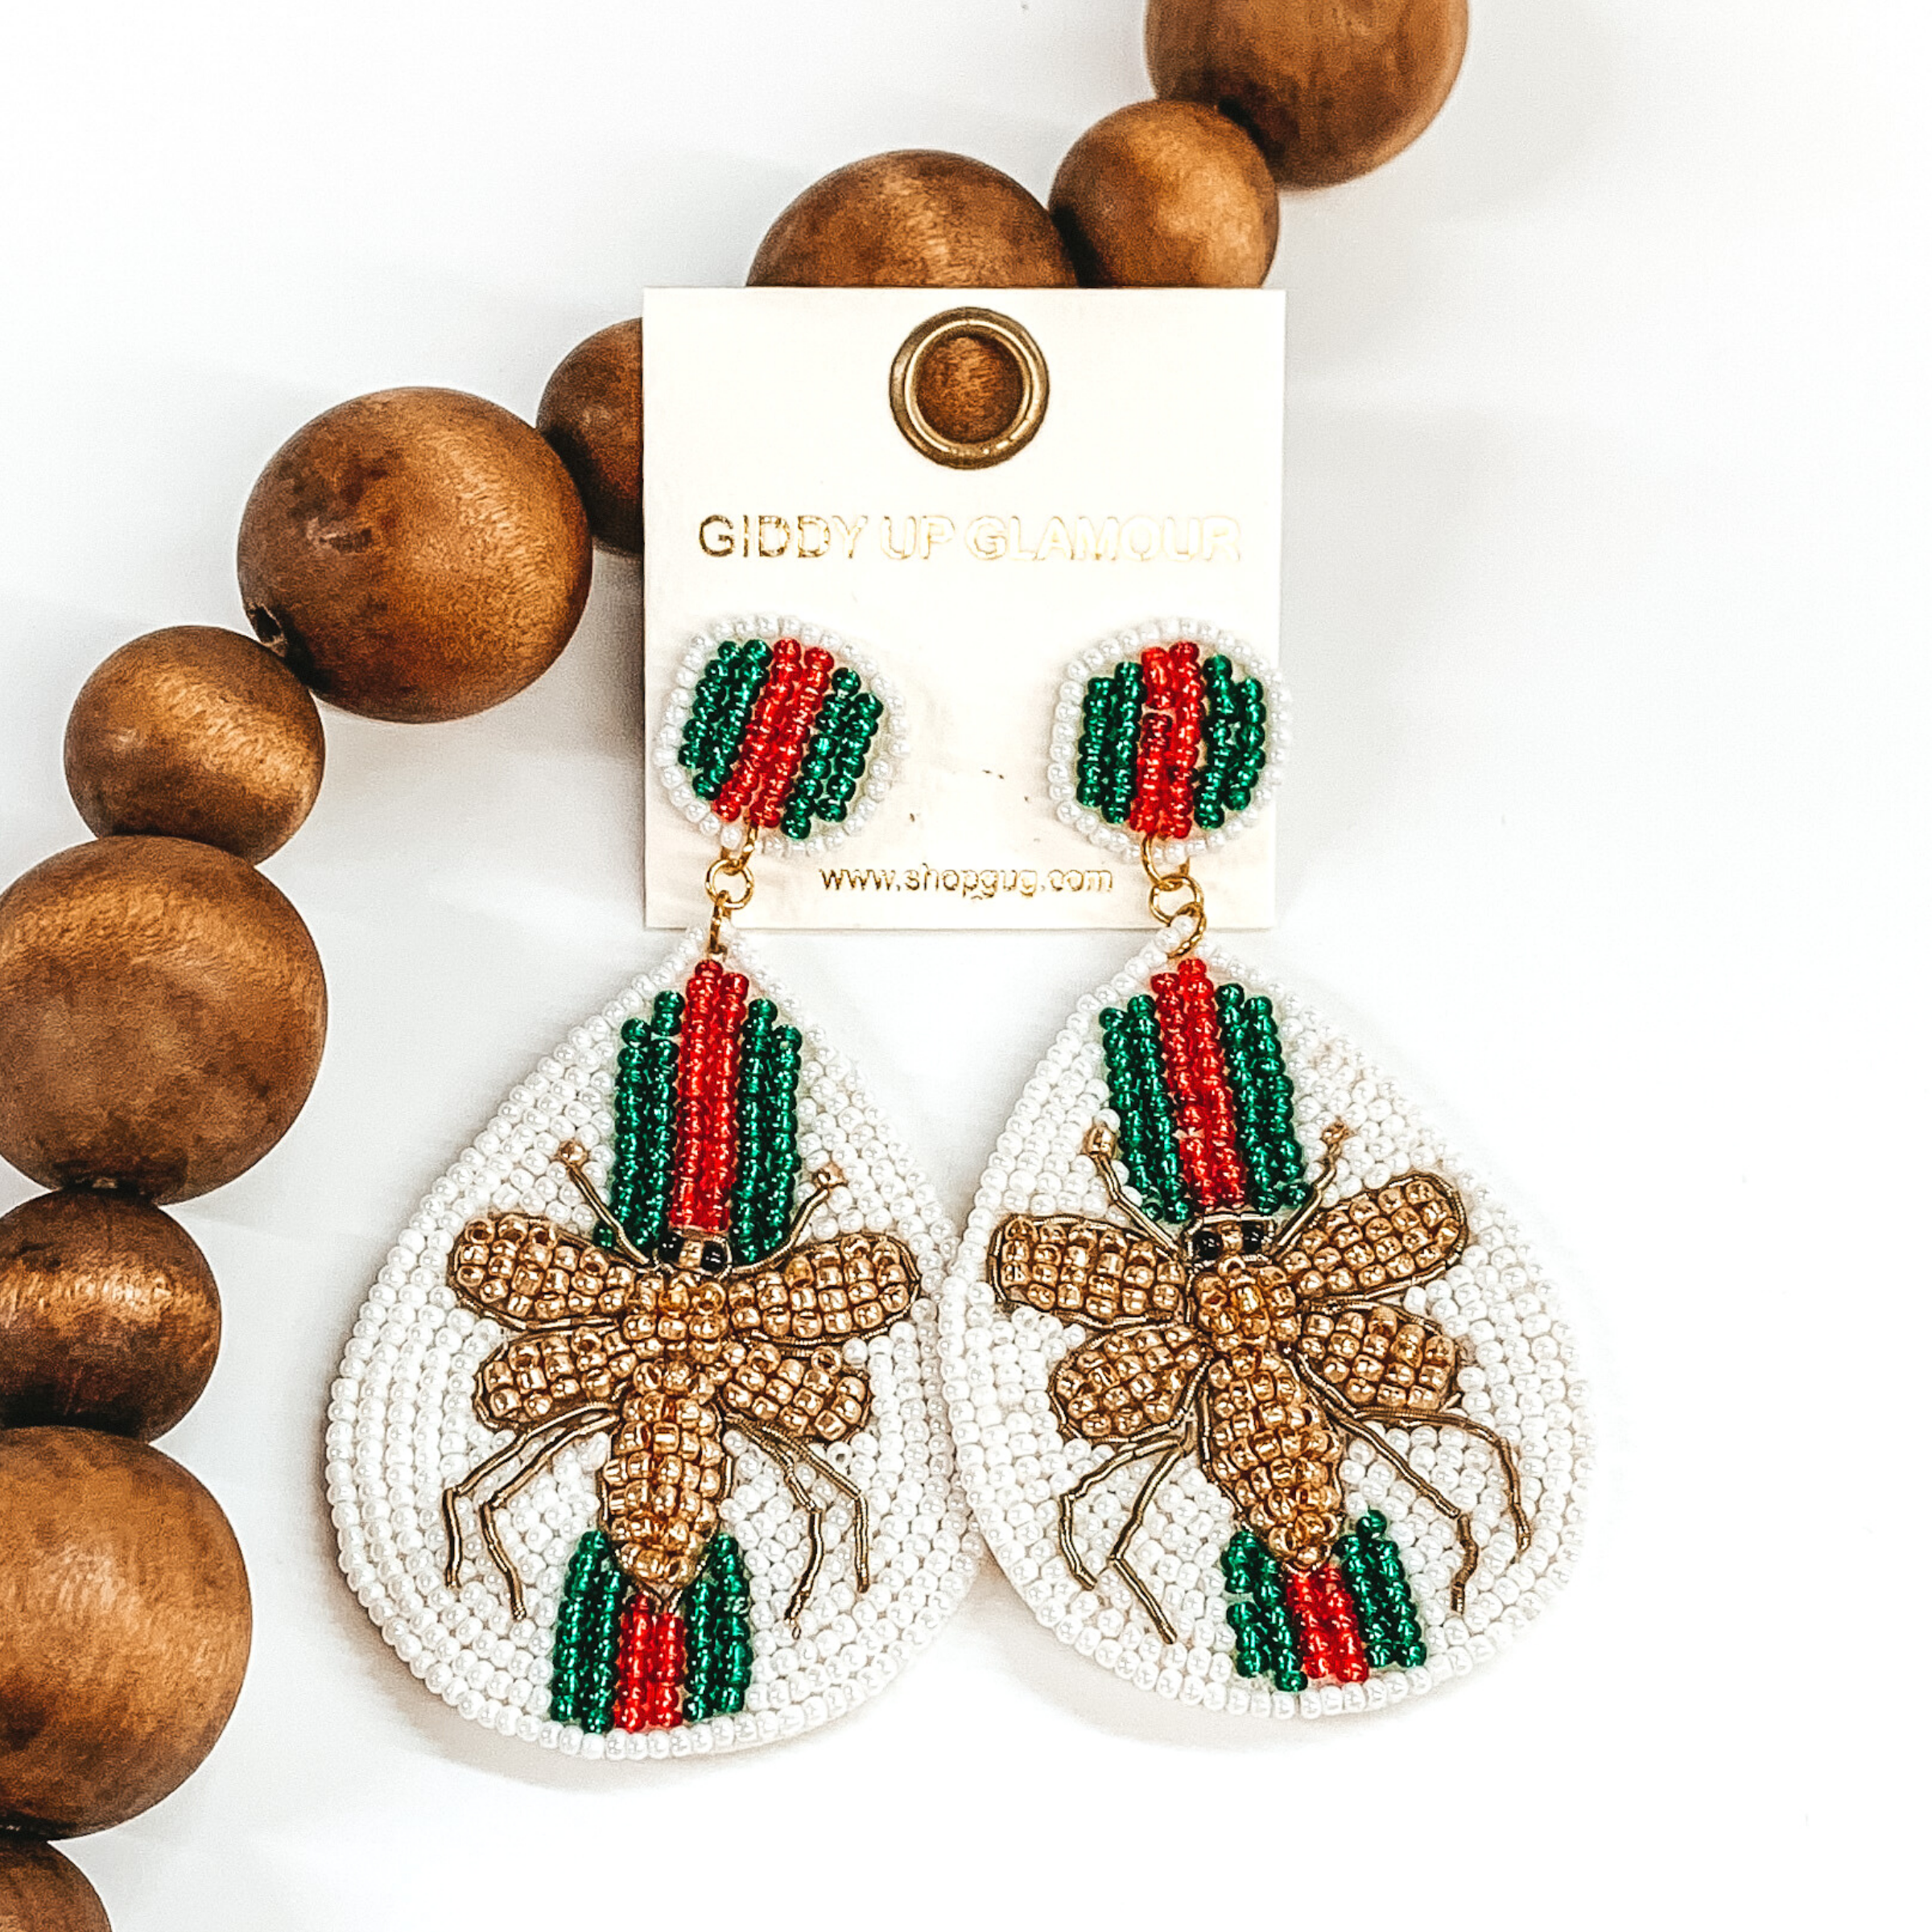 Circle beaded studs with a beaded teardrop dangle. The majority of the beads were ivory with green and red stripes. The center of the teardrop was a gold beaded bee. These earrings are pictured on a white background with dark brown beads.